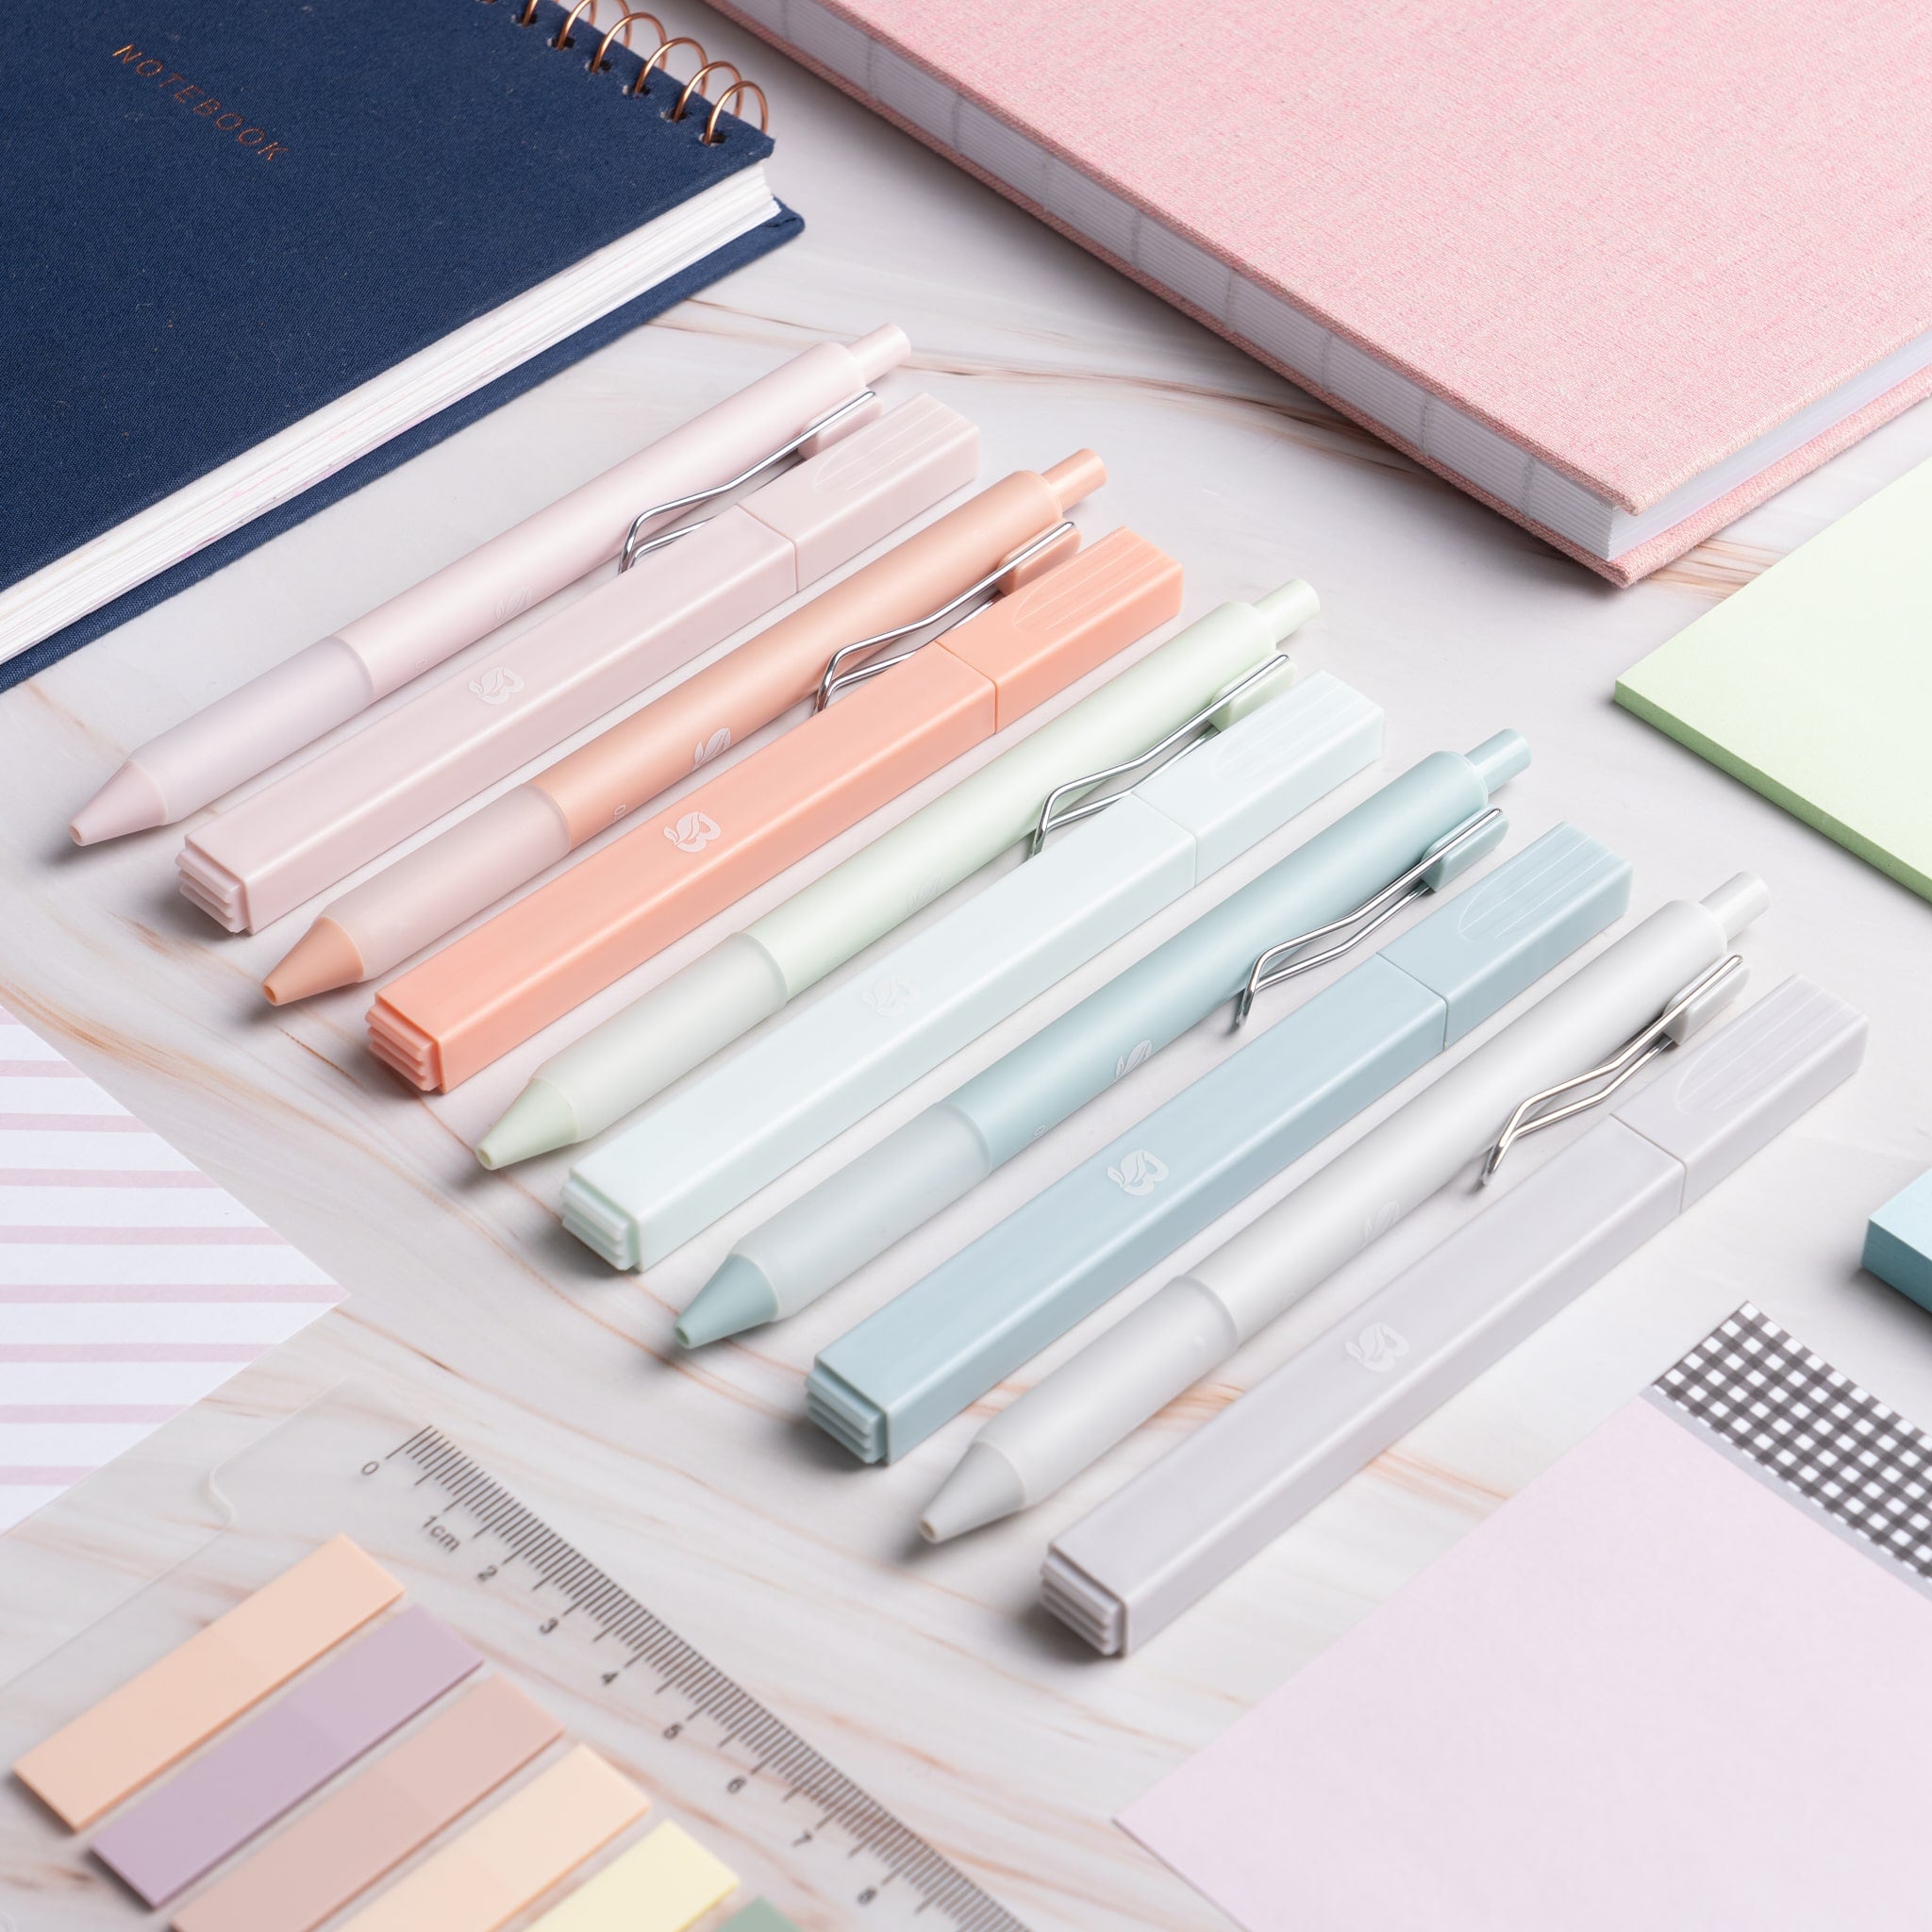 Blieve - Aesthetic Highlighters and Gel Pens with Soft Ink and Tip, No Bleed Dry Fast Easy to Hold, for Bible Journaling Planner Notes School Office